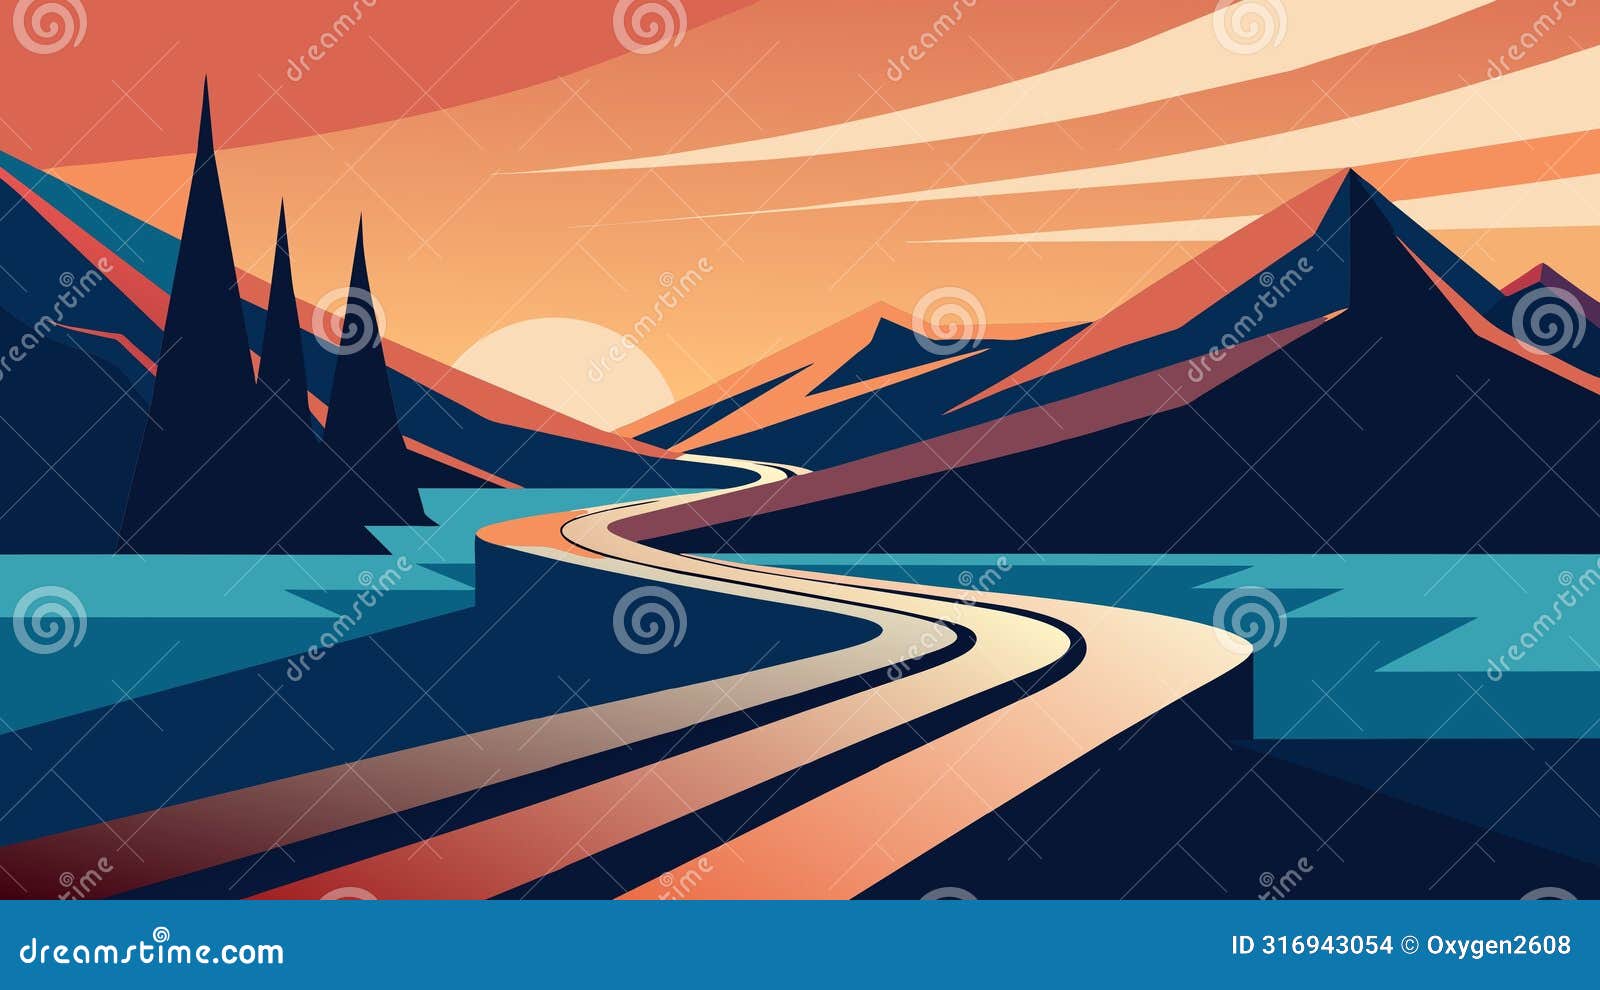 serene sunset mountainscape with winding road